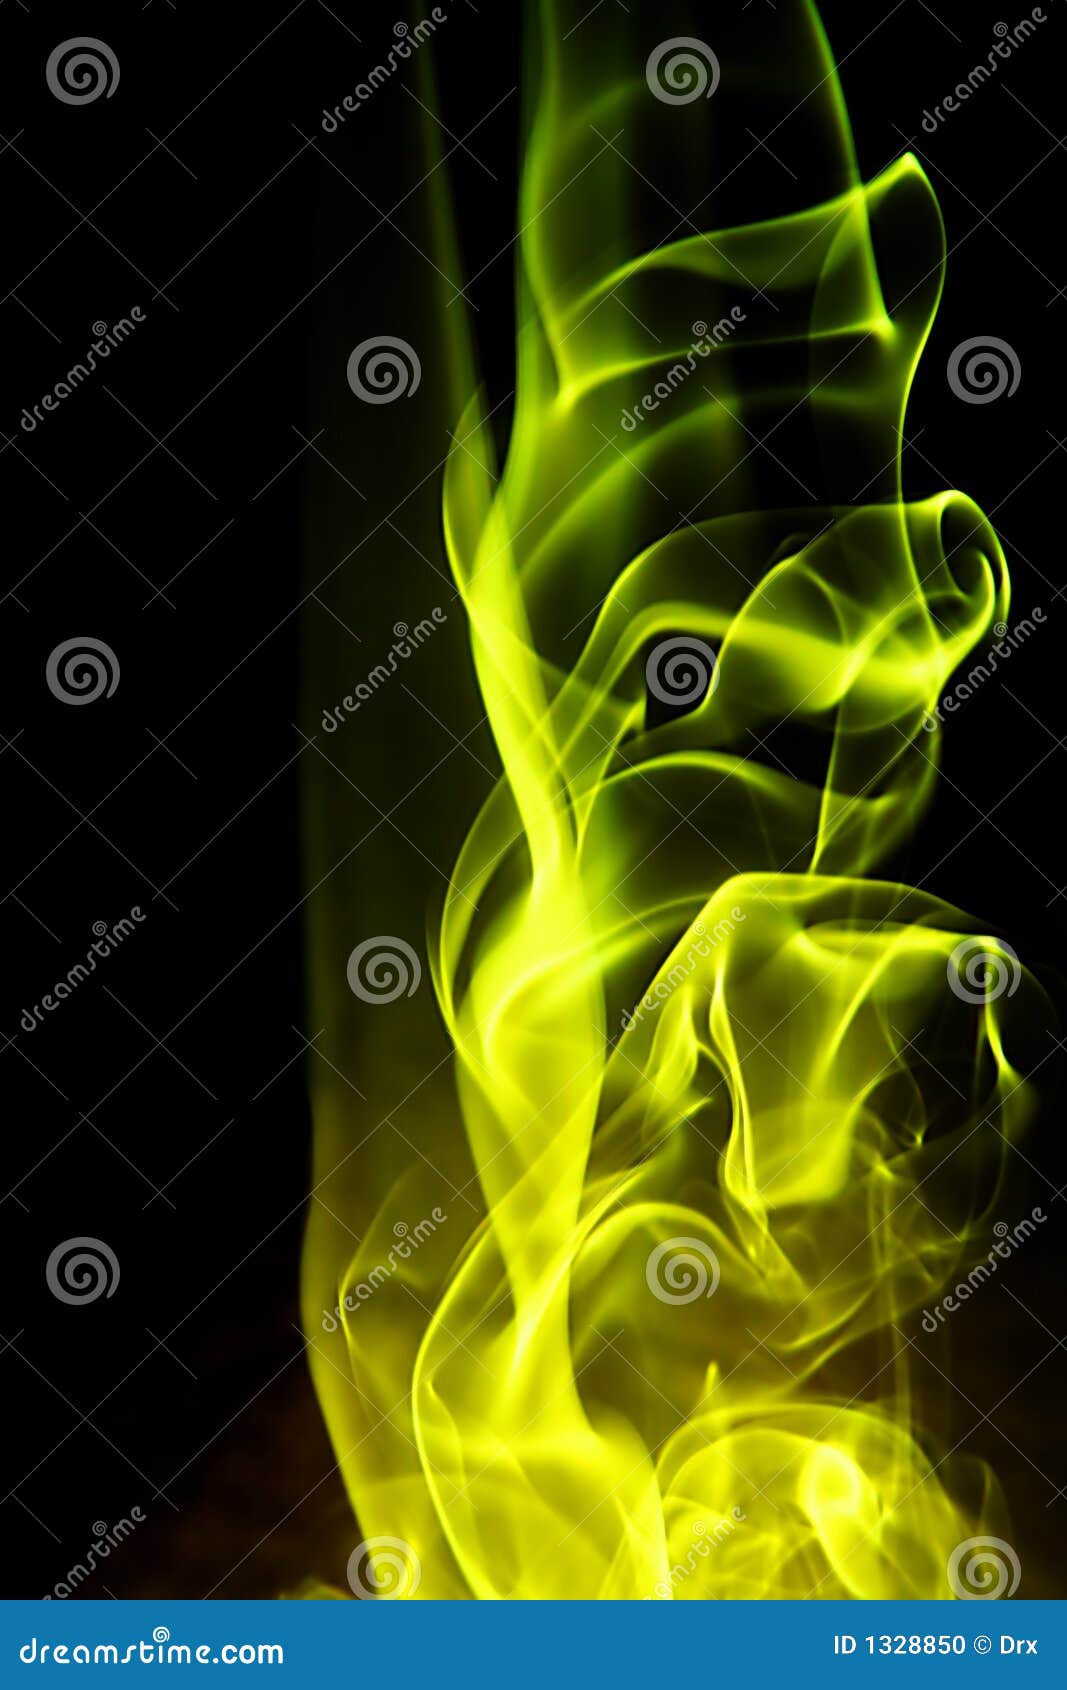 Abstract Background - Yellow Fire Shape Stock Photo ...
